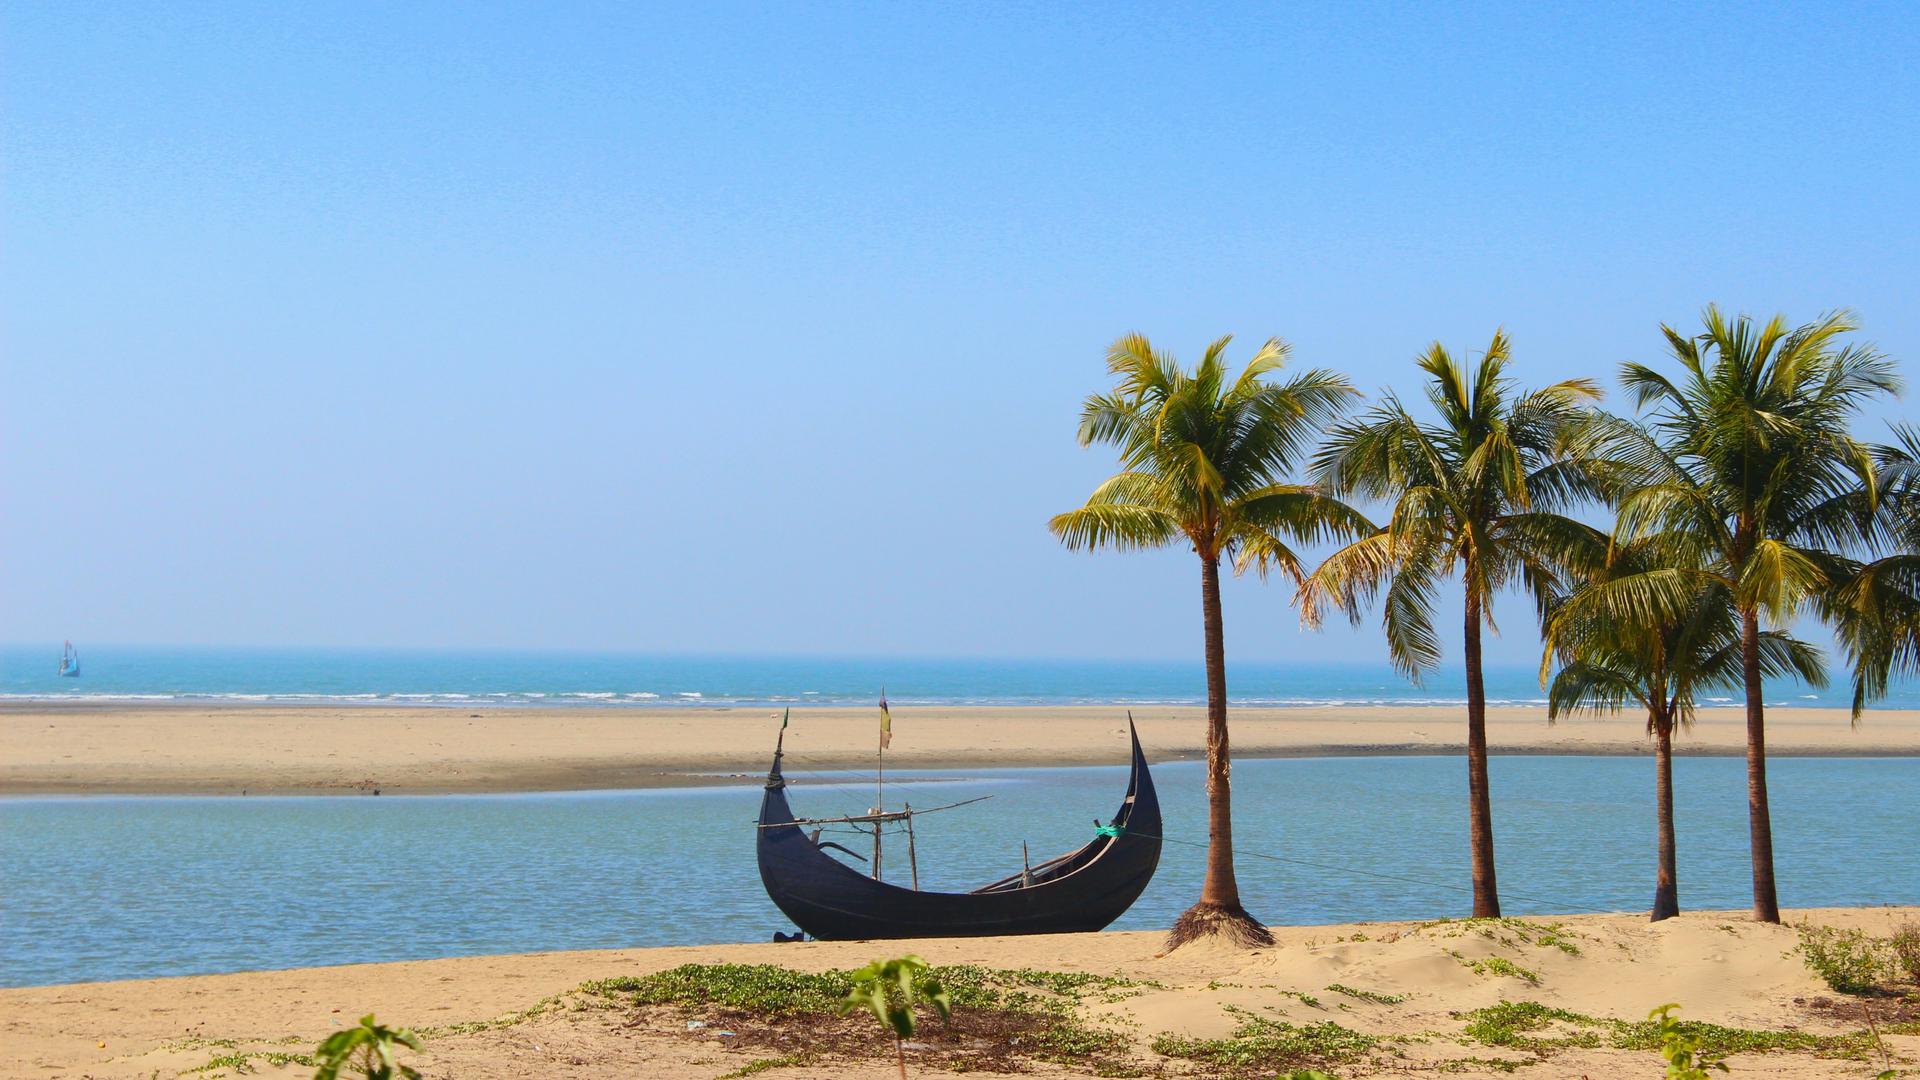 Inani Beach, an 11-mile beach on the Bay of Bengal, makes up part of Cox's Bazar 75-mile sea beach — one of the longest beaches in the world. 